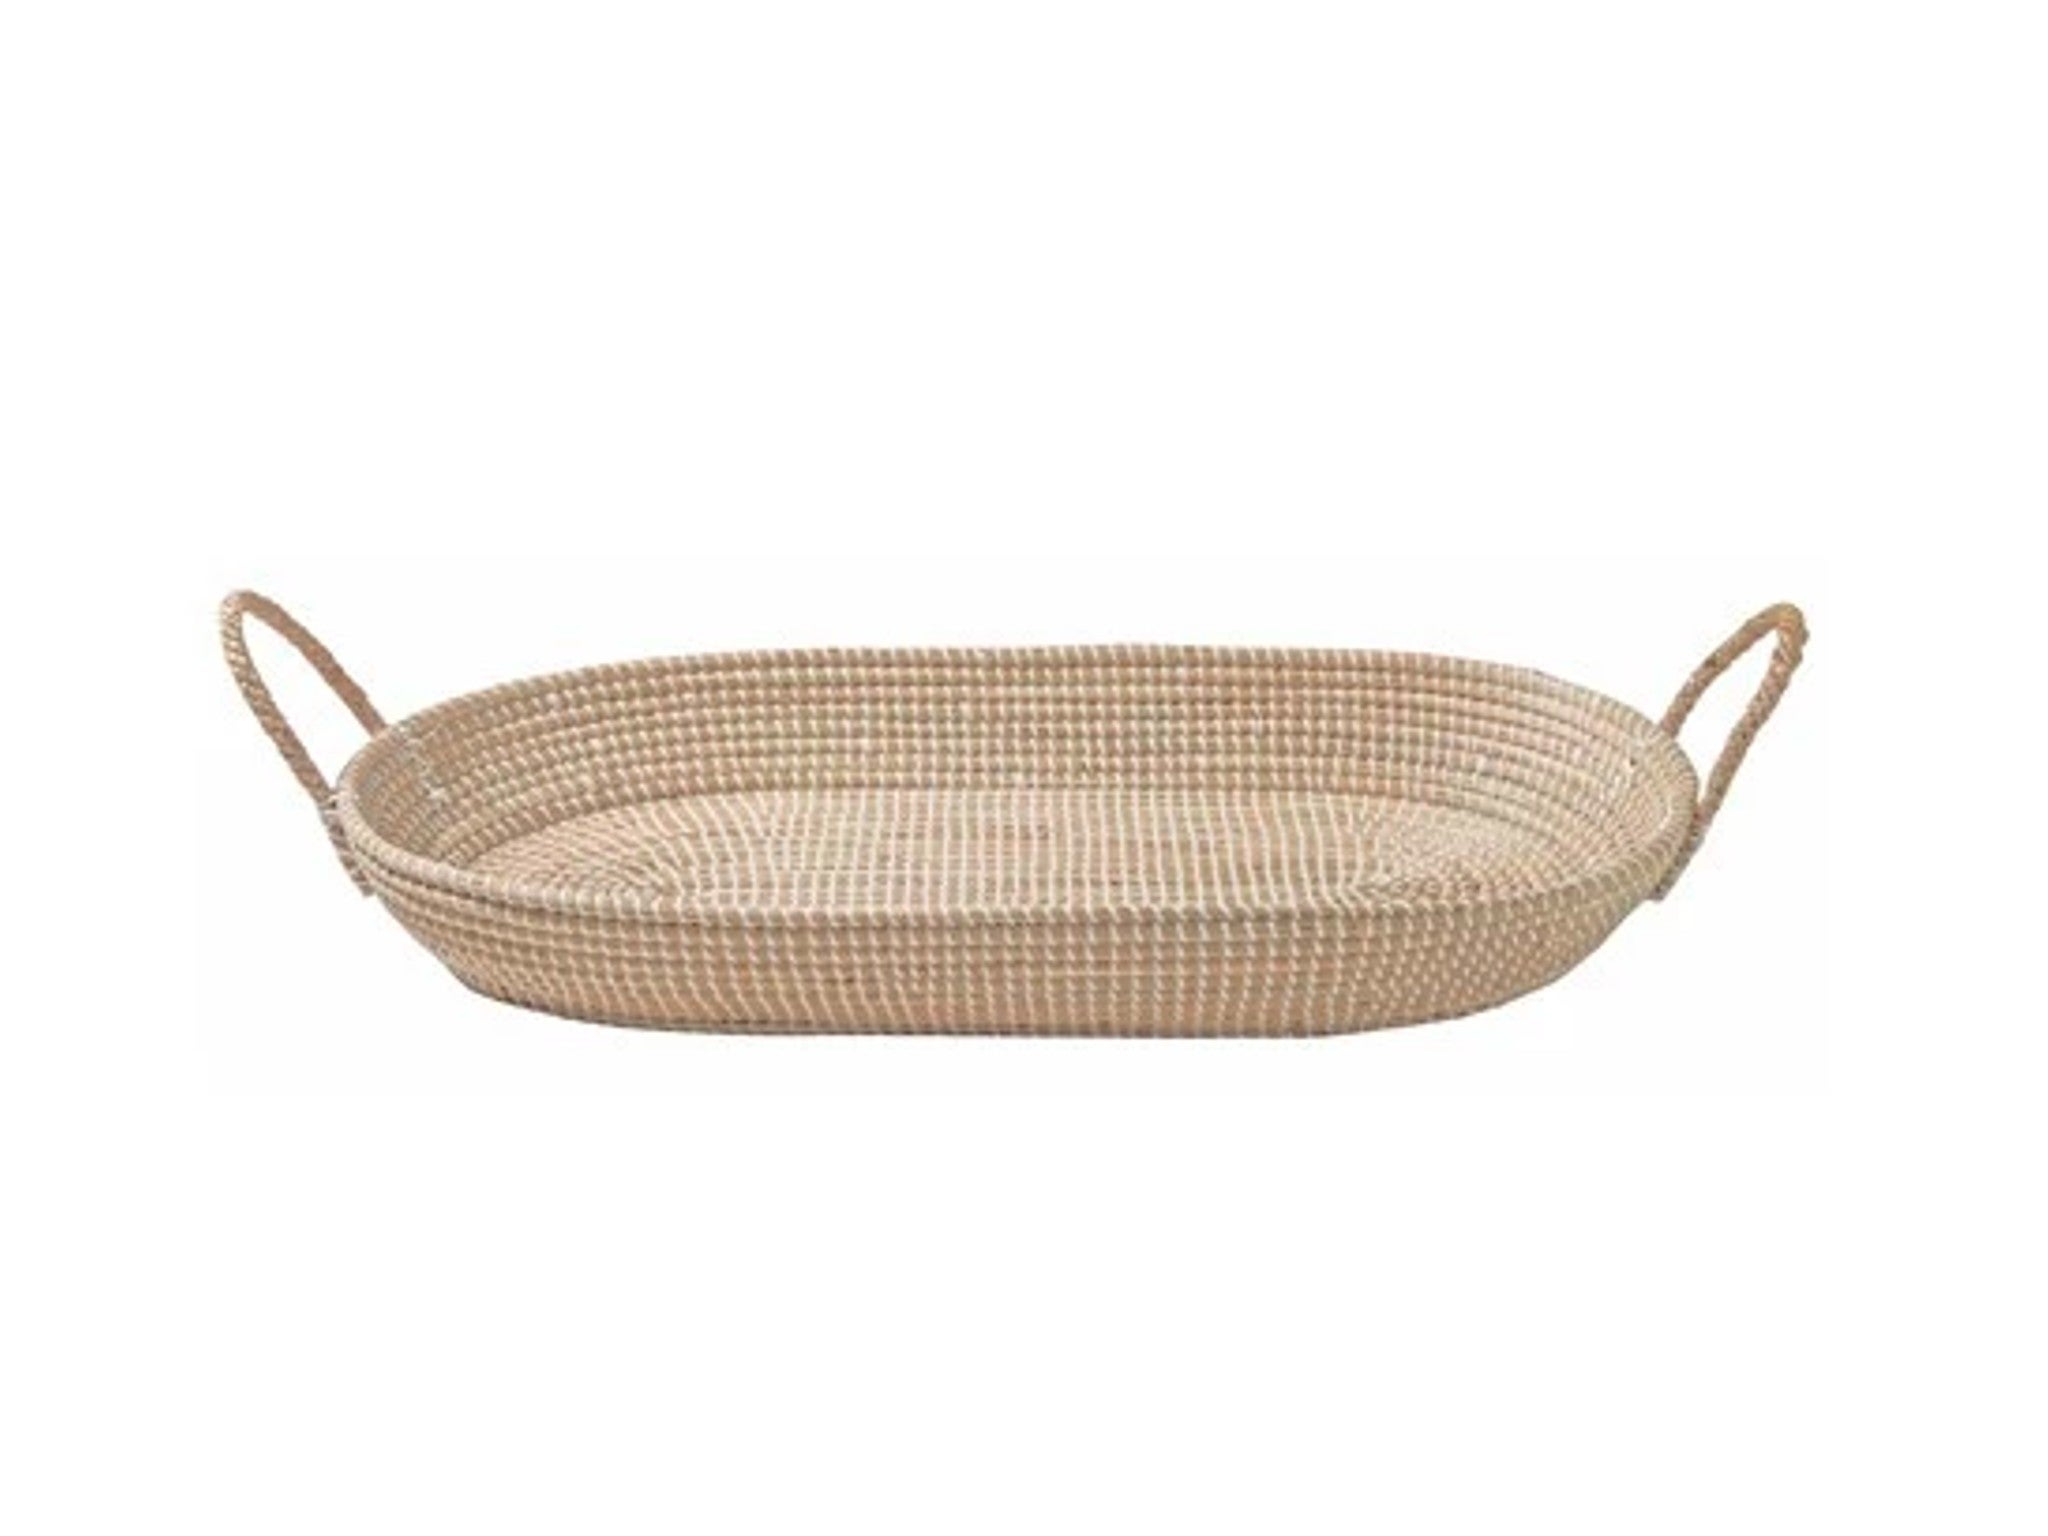 Avery Row seagrass baby changing basket indybest.jpg